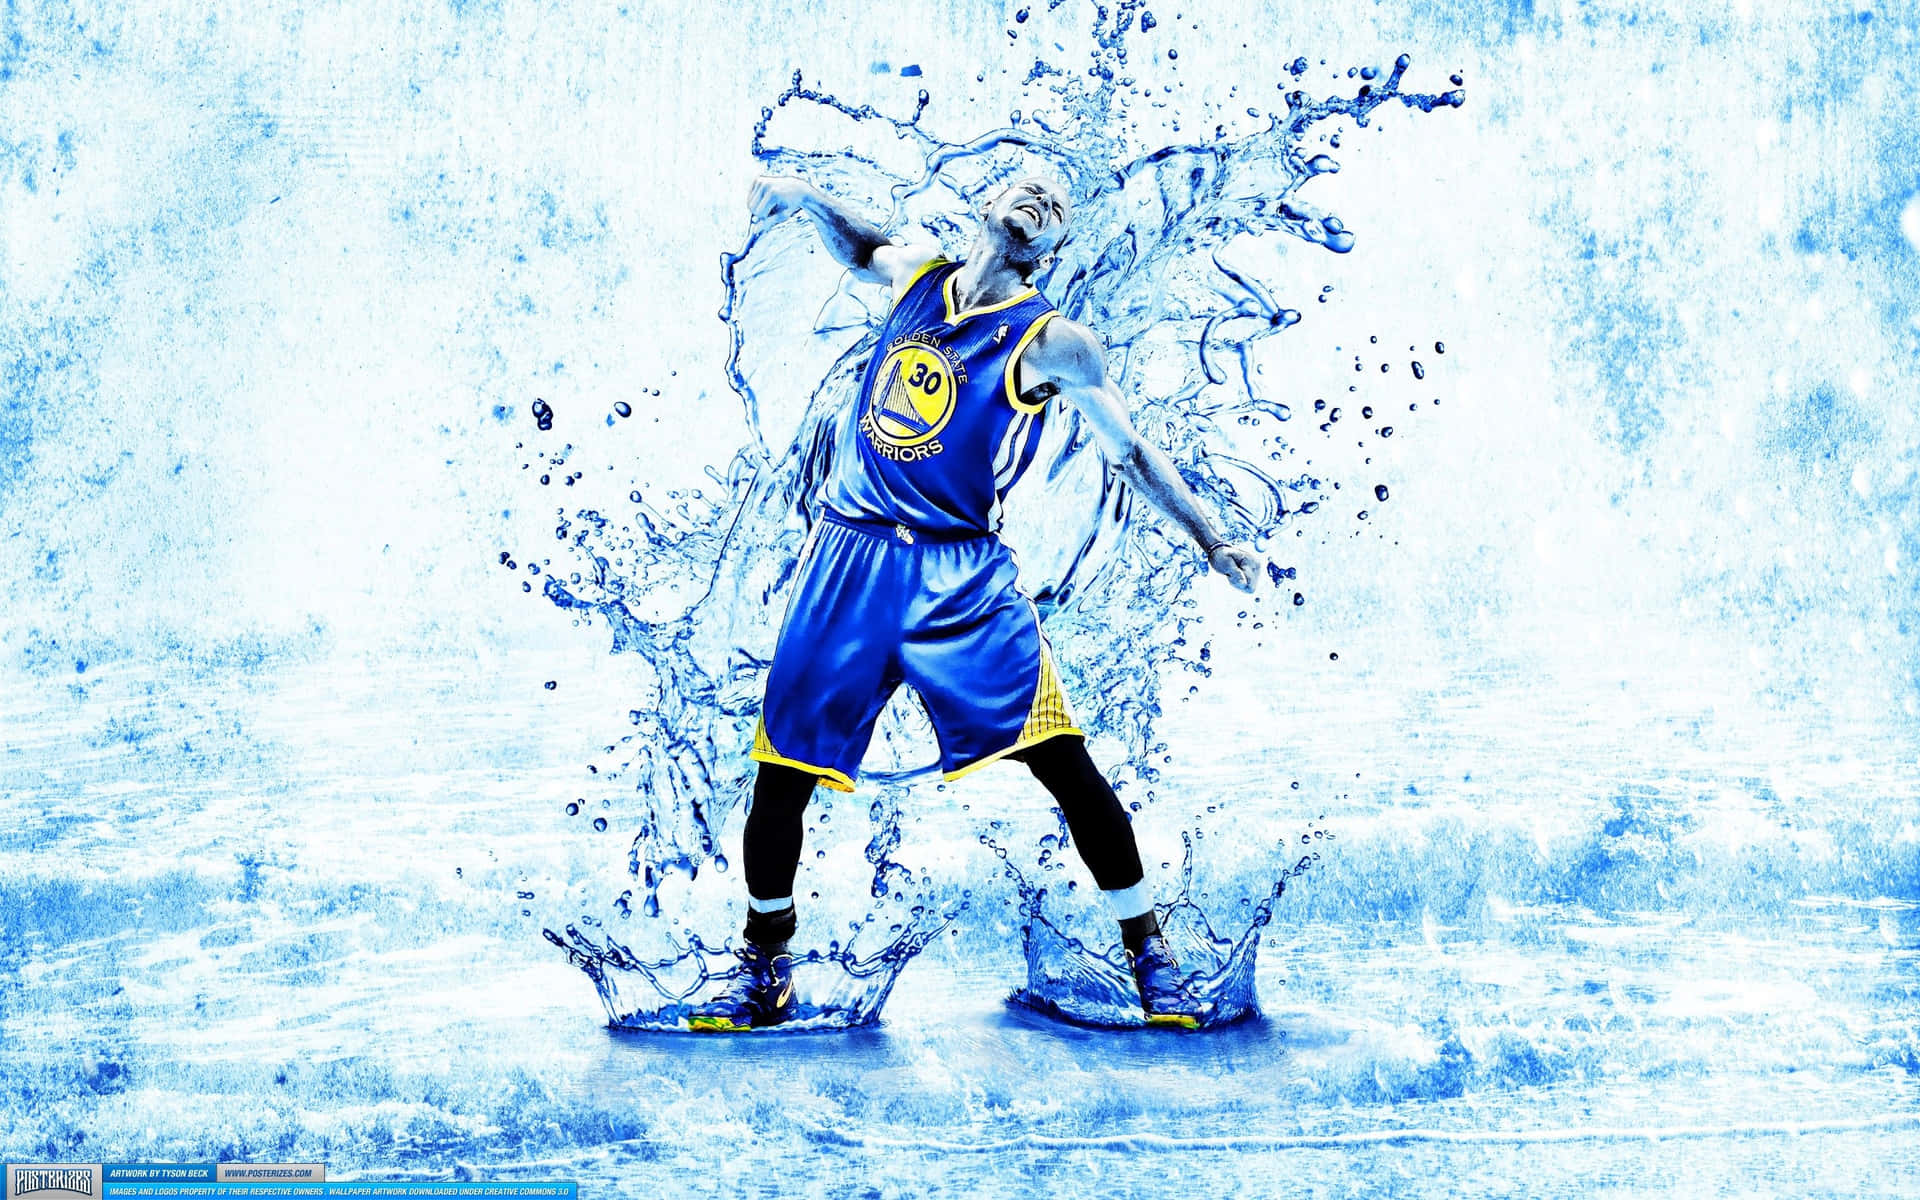 Stephen Curry Jersey Wallpapers - Wallpaper Cave